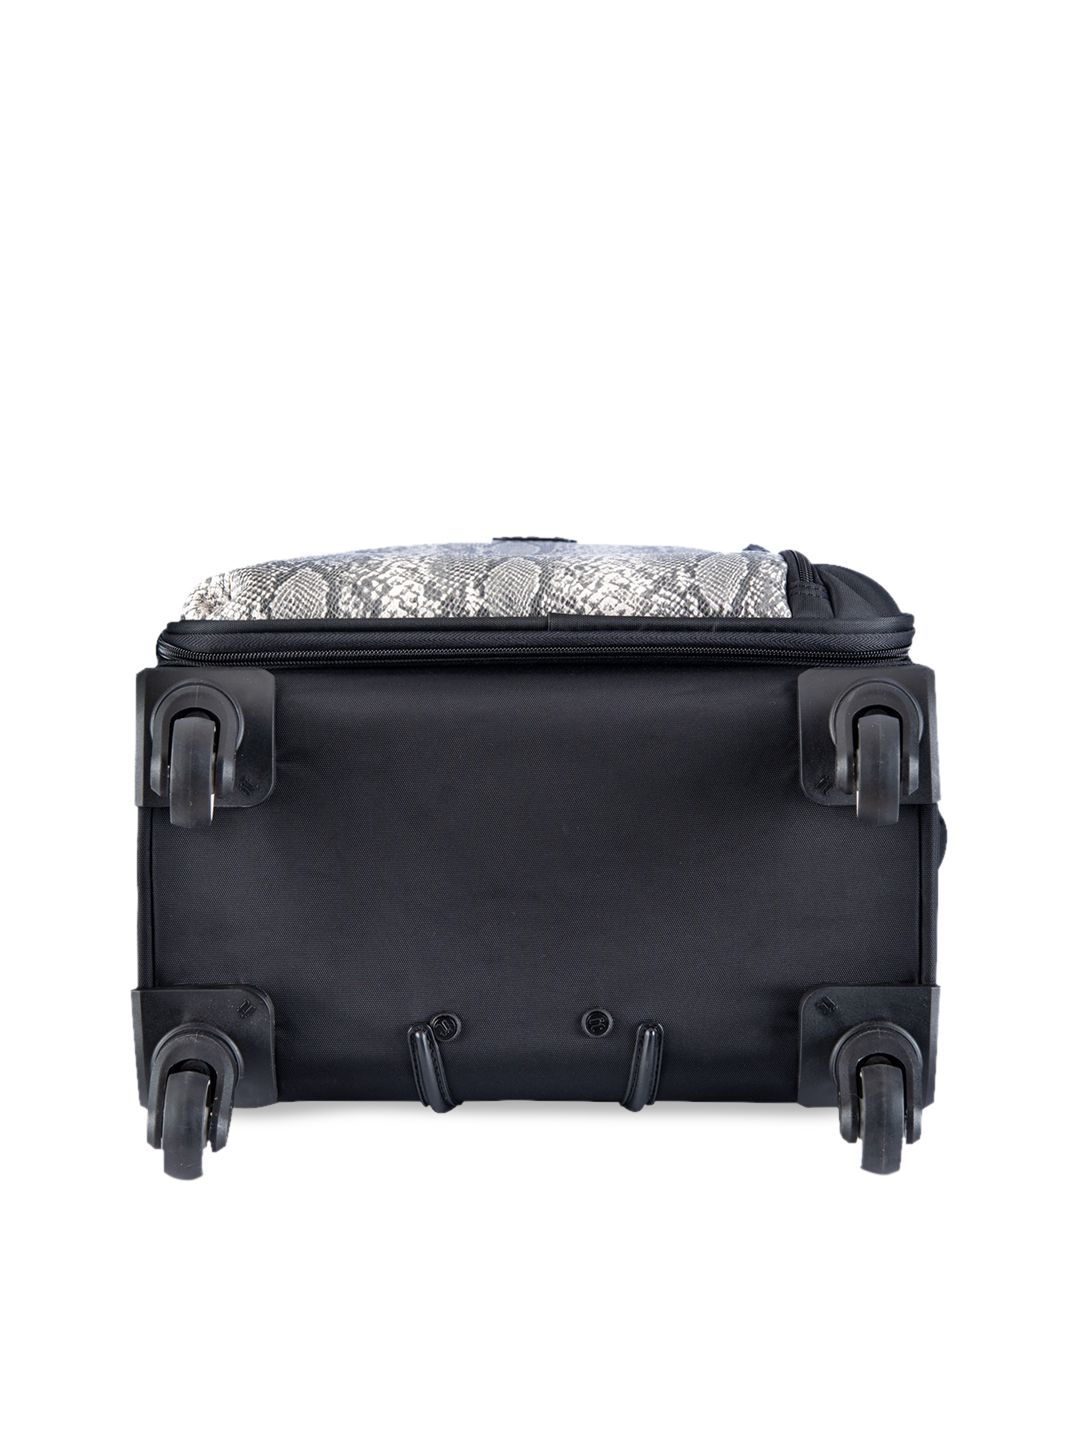 IT luggage Black Flattery Soft Large Suitcase Price in India